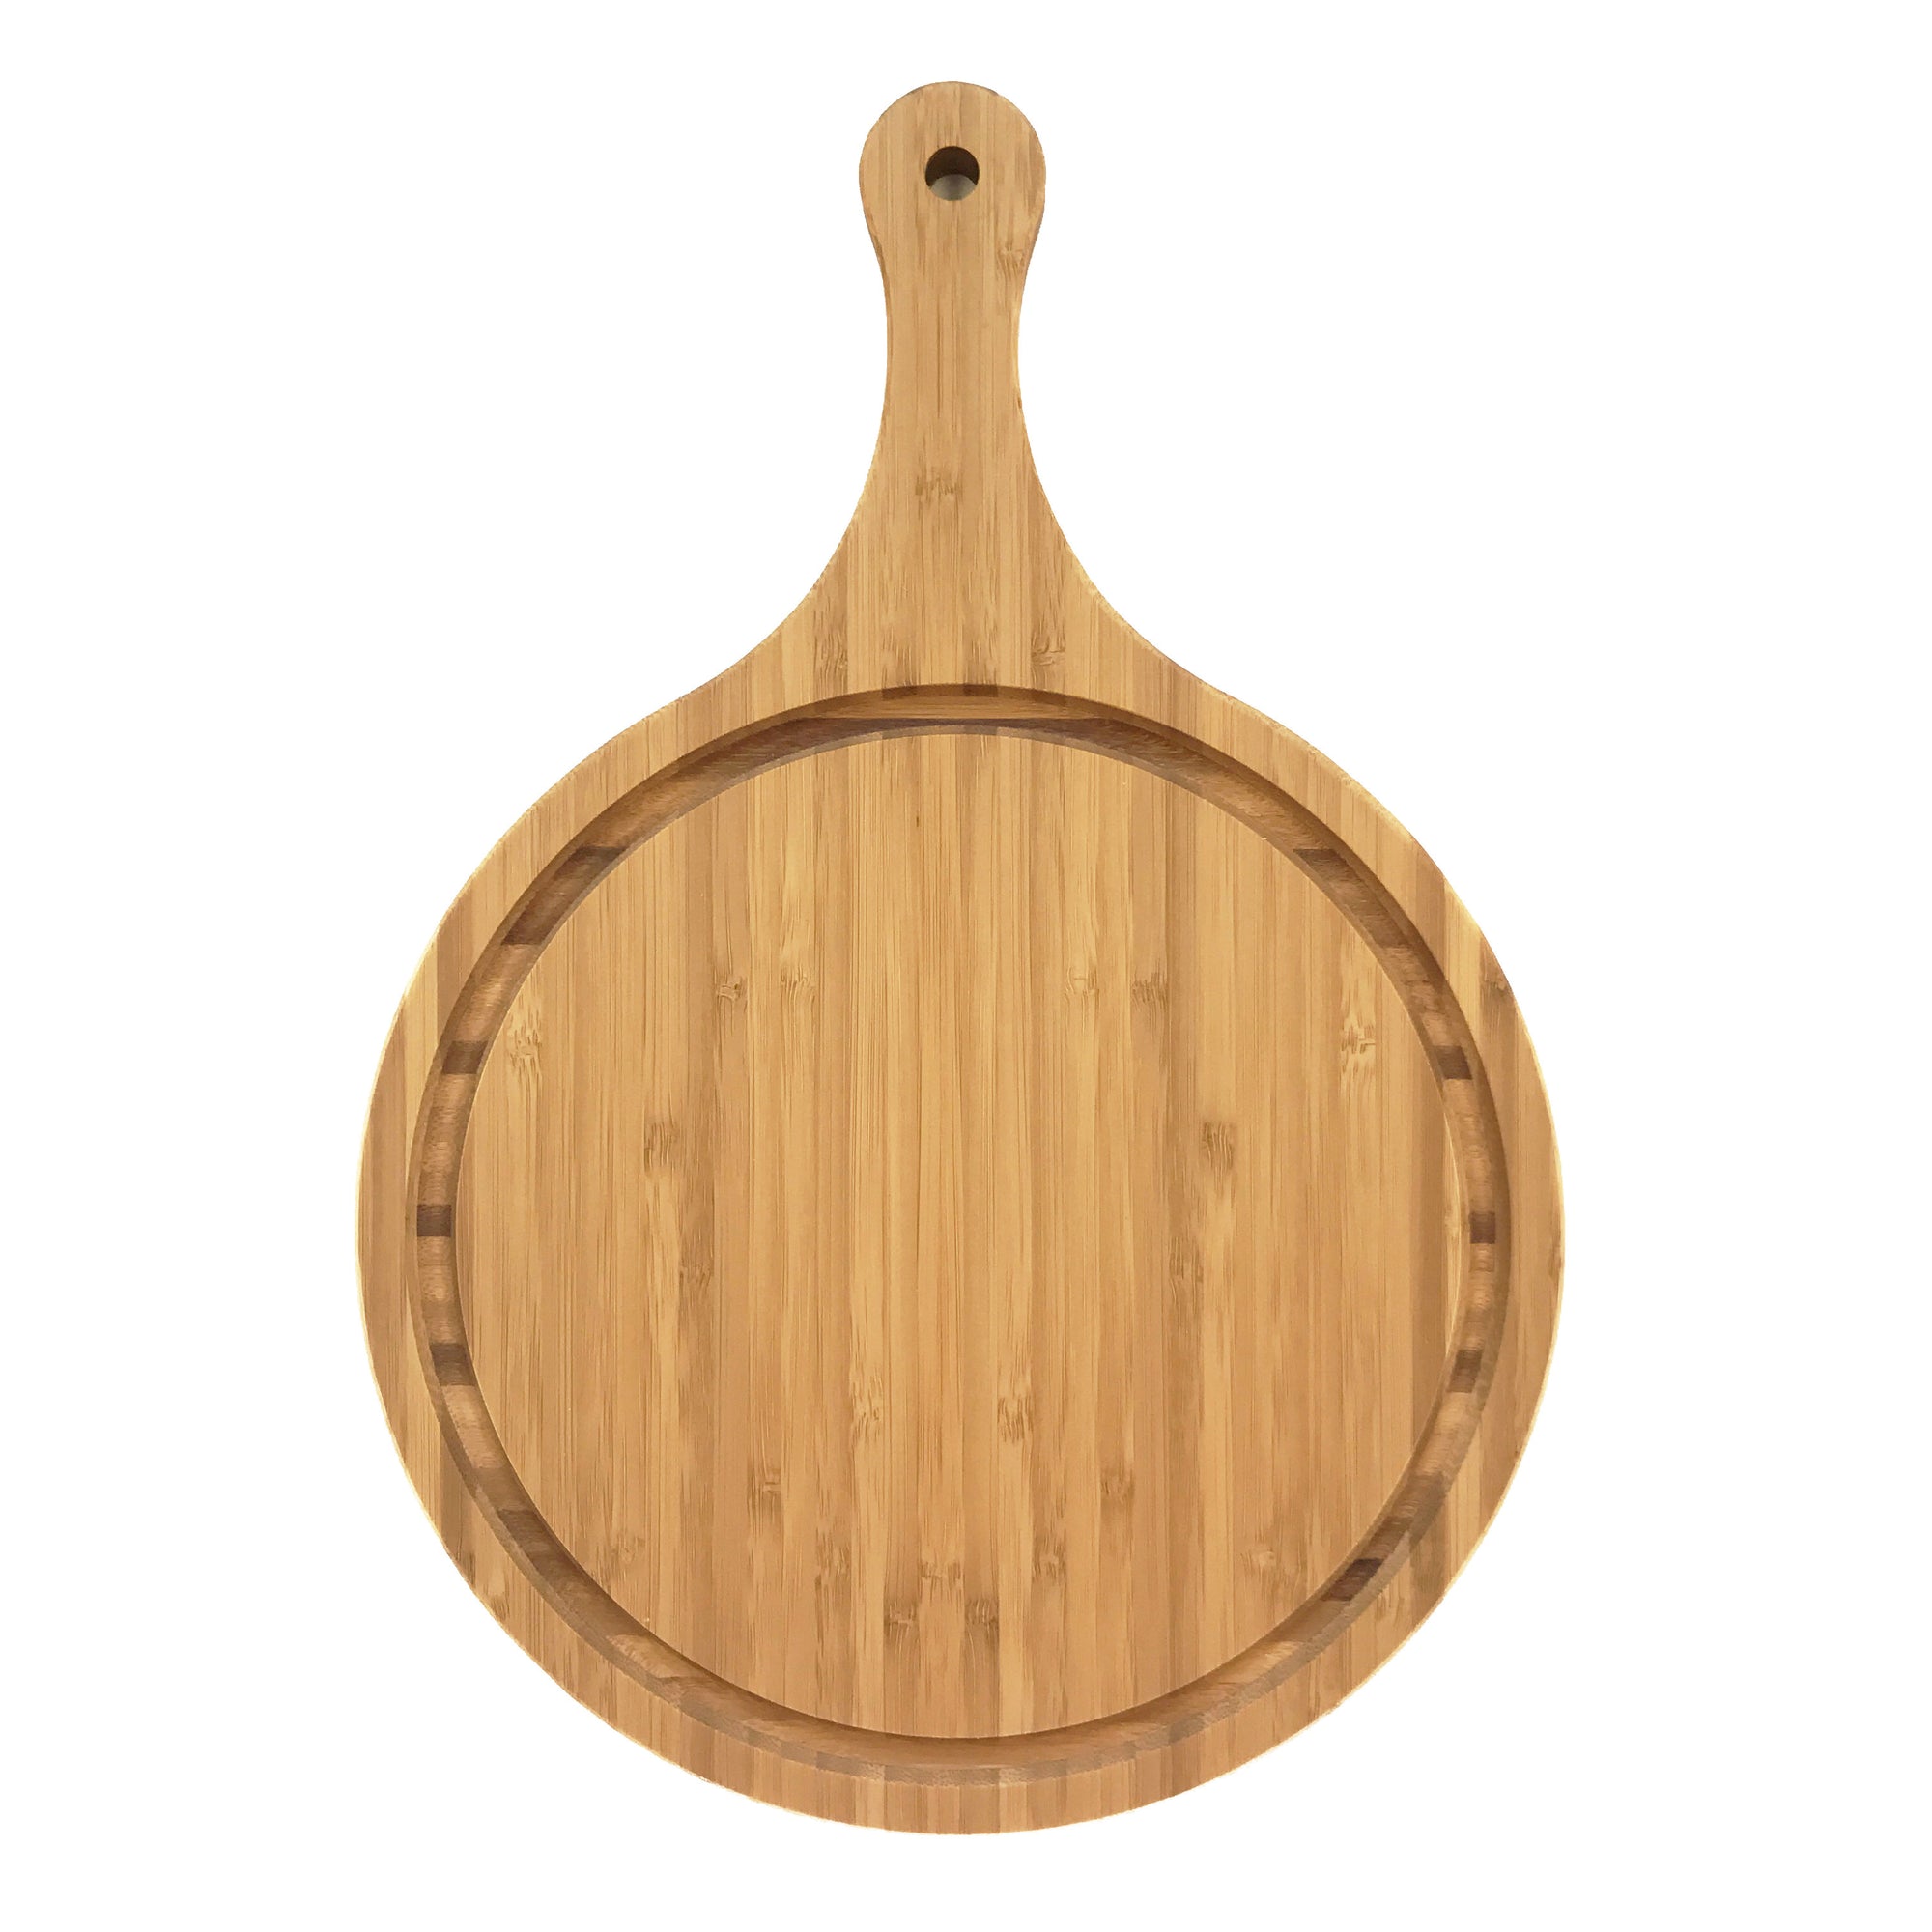 𝐋𝐮𝐱𝐮𝐫𝐲 Bamboo Cutting Board for Kitchen - Chopping Board w/Juice  Groove & Easy Grip Handle - Organic Wooden Cutting Boards for Meat, Cheese,  Fruits & Vegetables (Set of 3) 